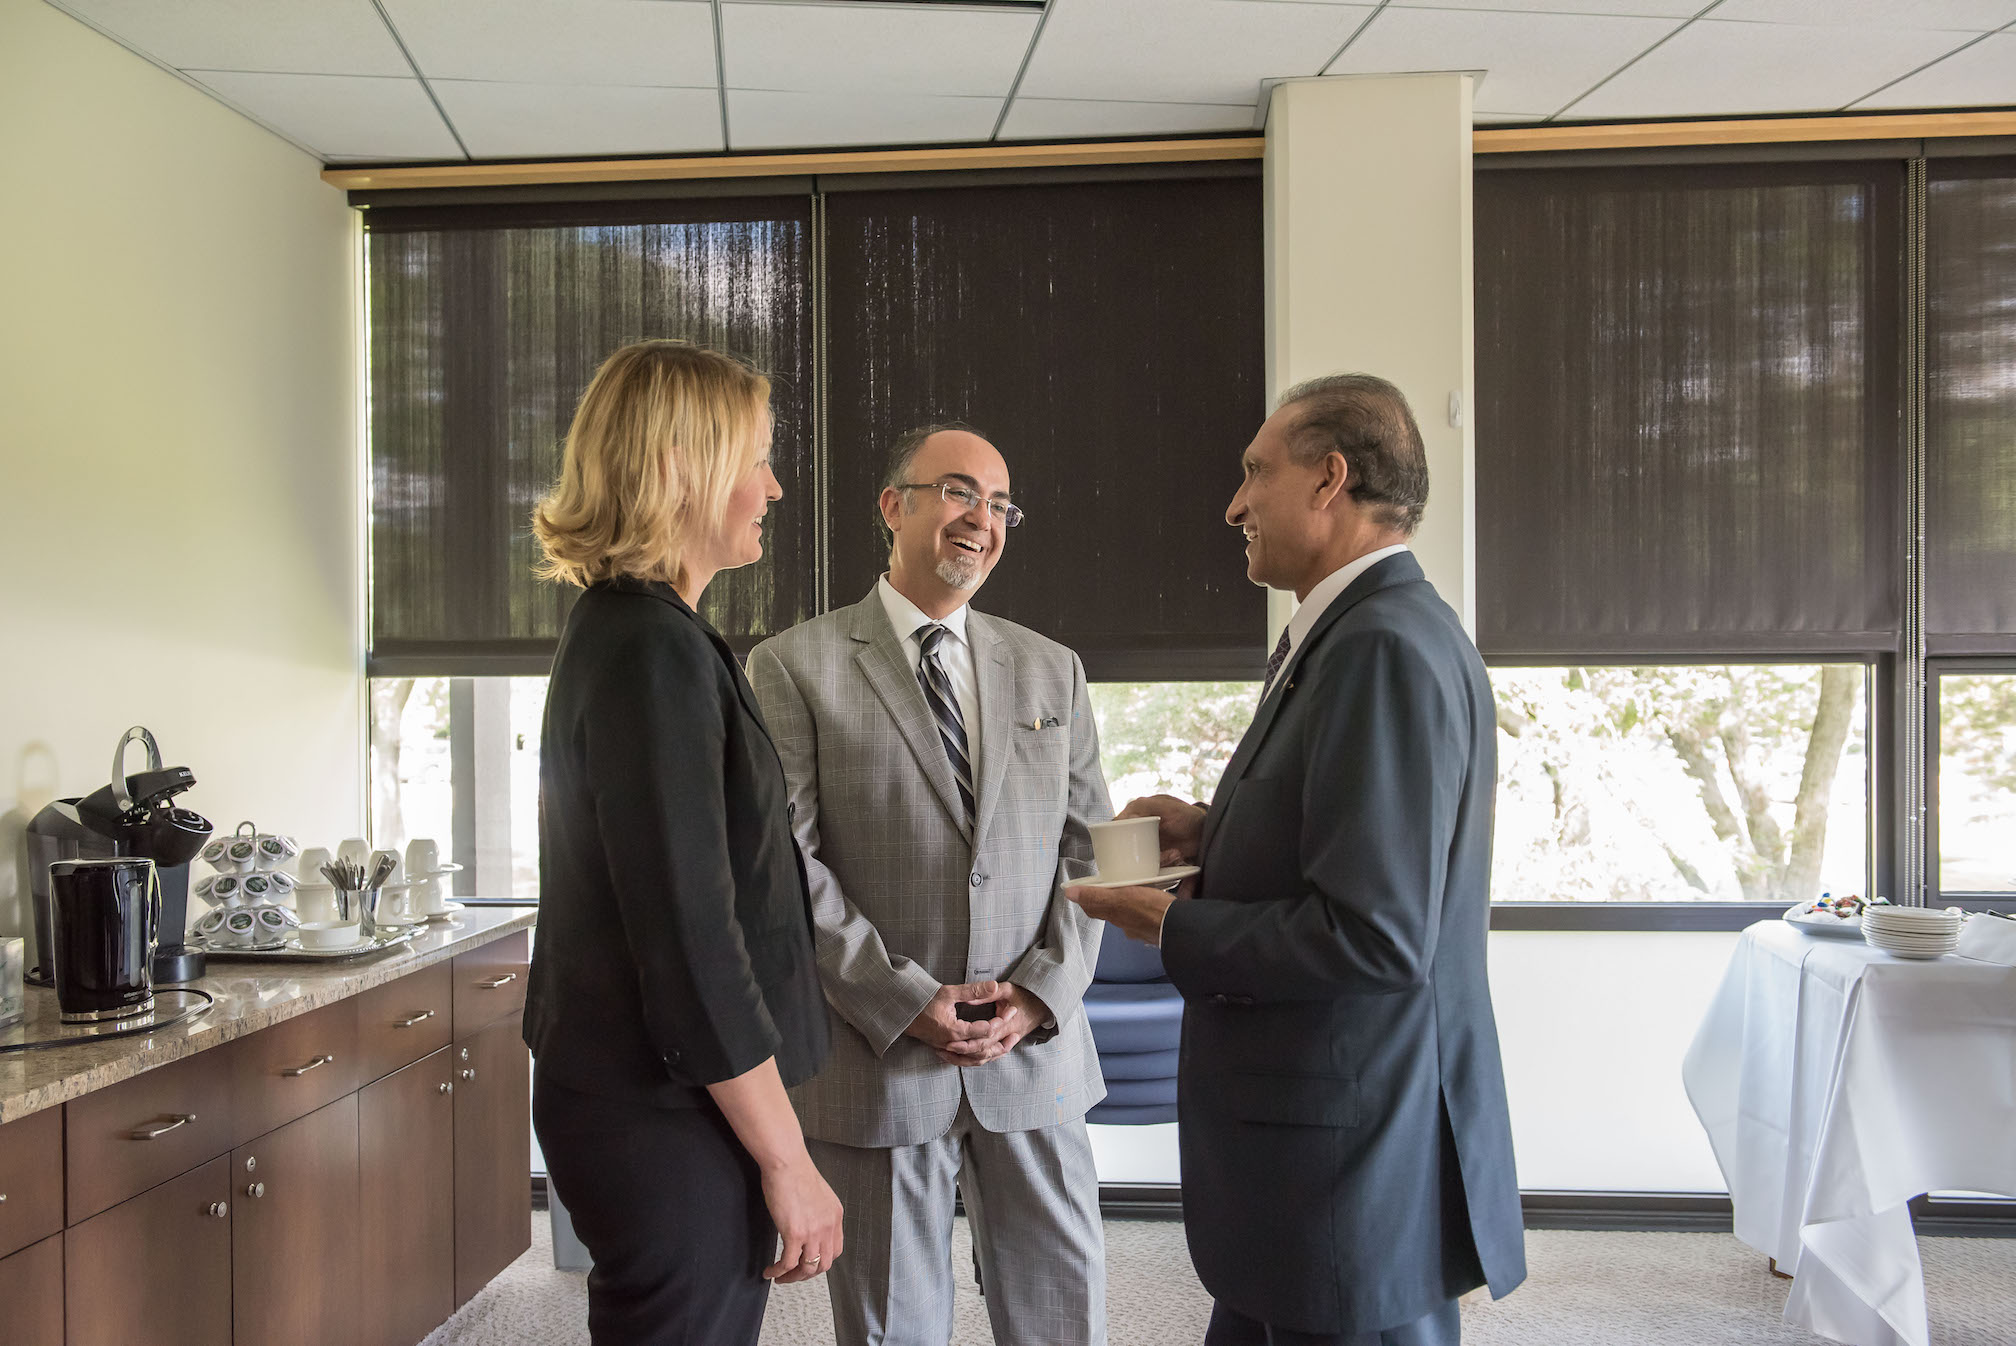 His Excellency Chaudhry, Vice President Liesl Downey and Dr. Farzaneh at the NEIU president's conference room carry a conversation at a small reception.